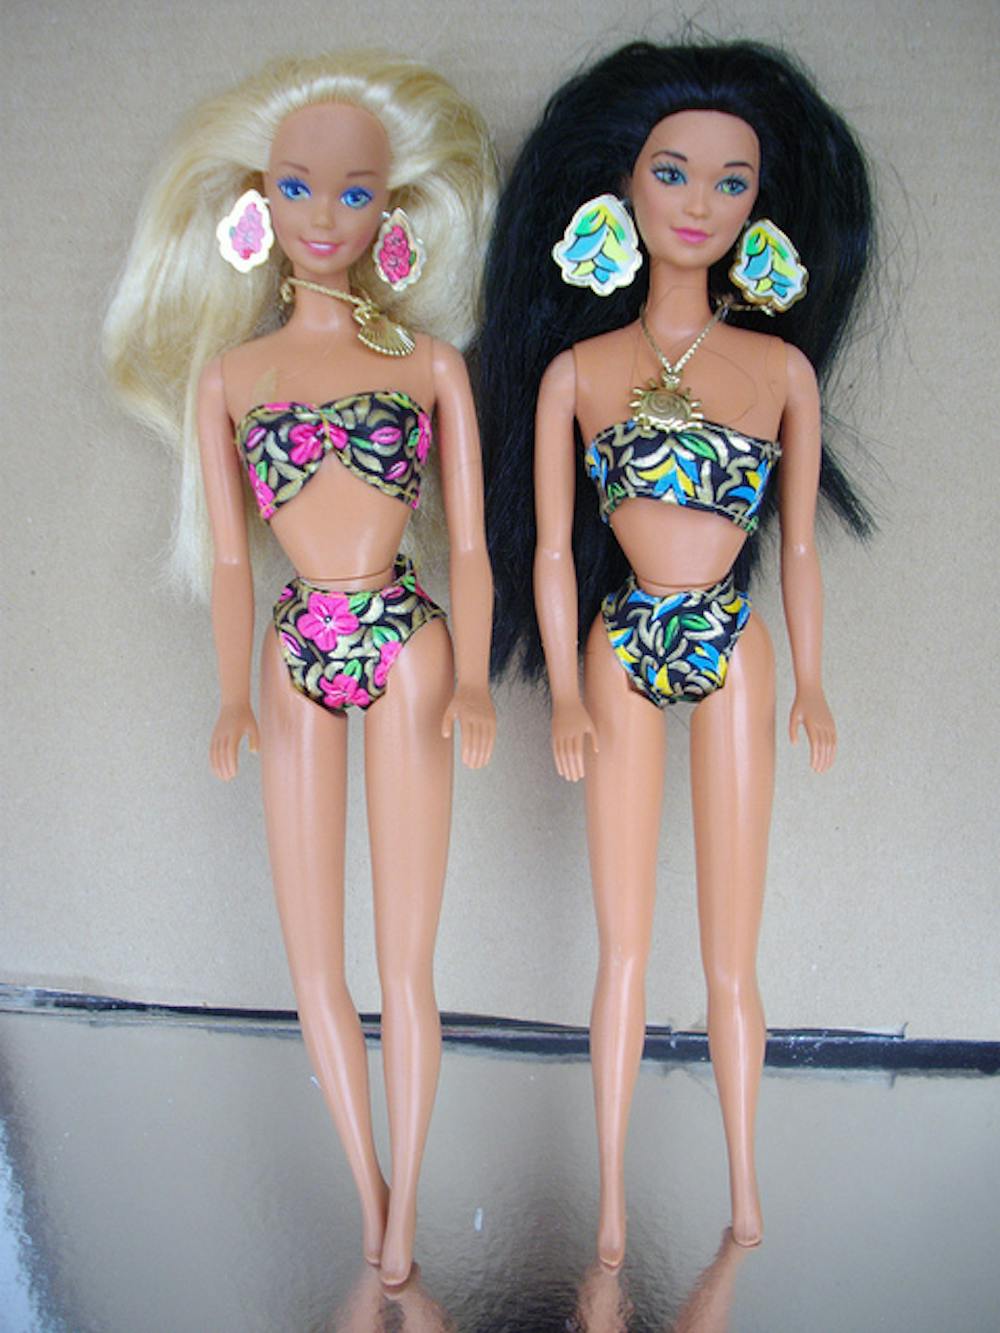 Is Barbie Bad For Body Image